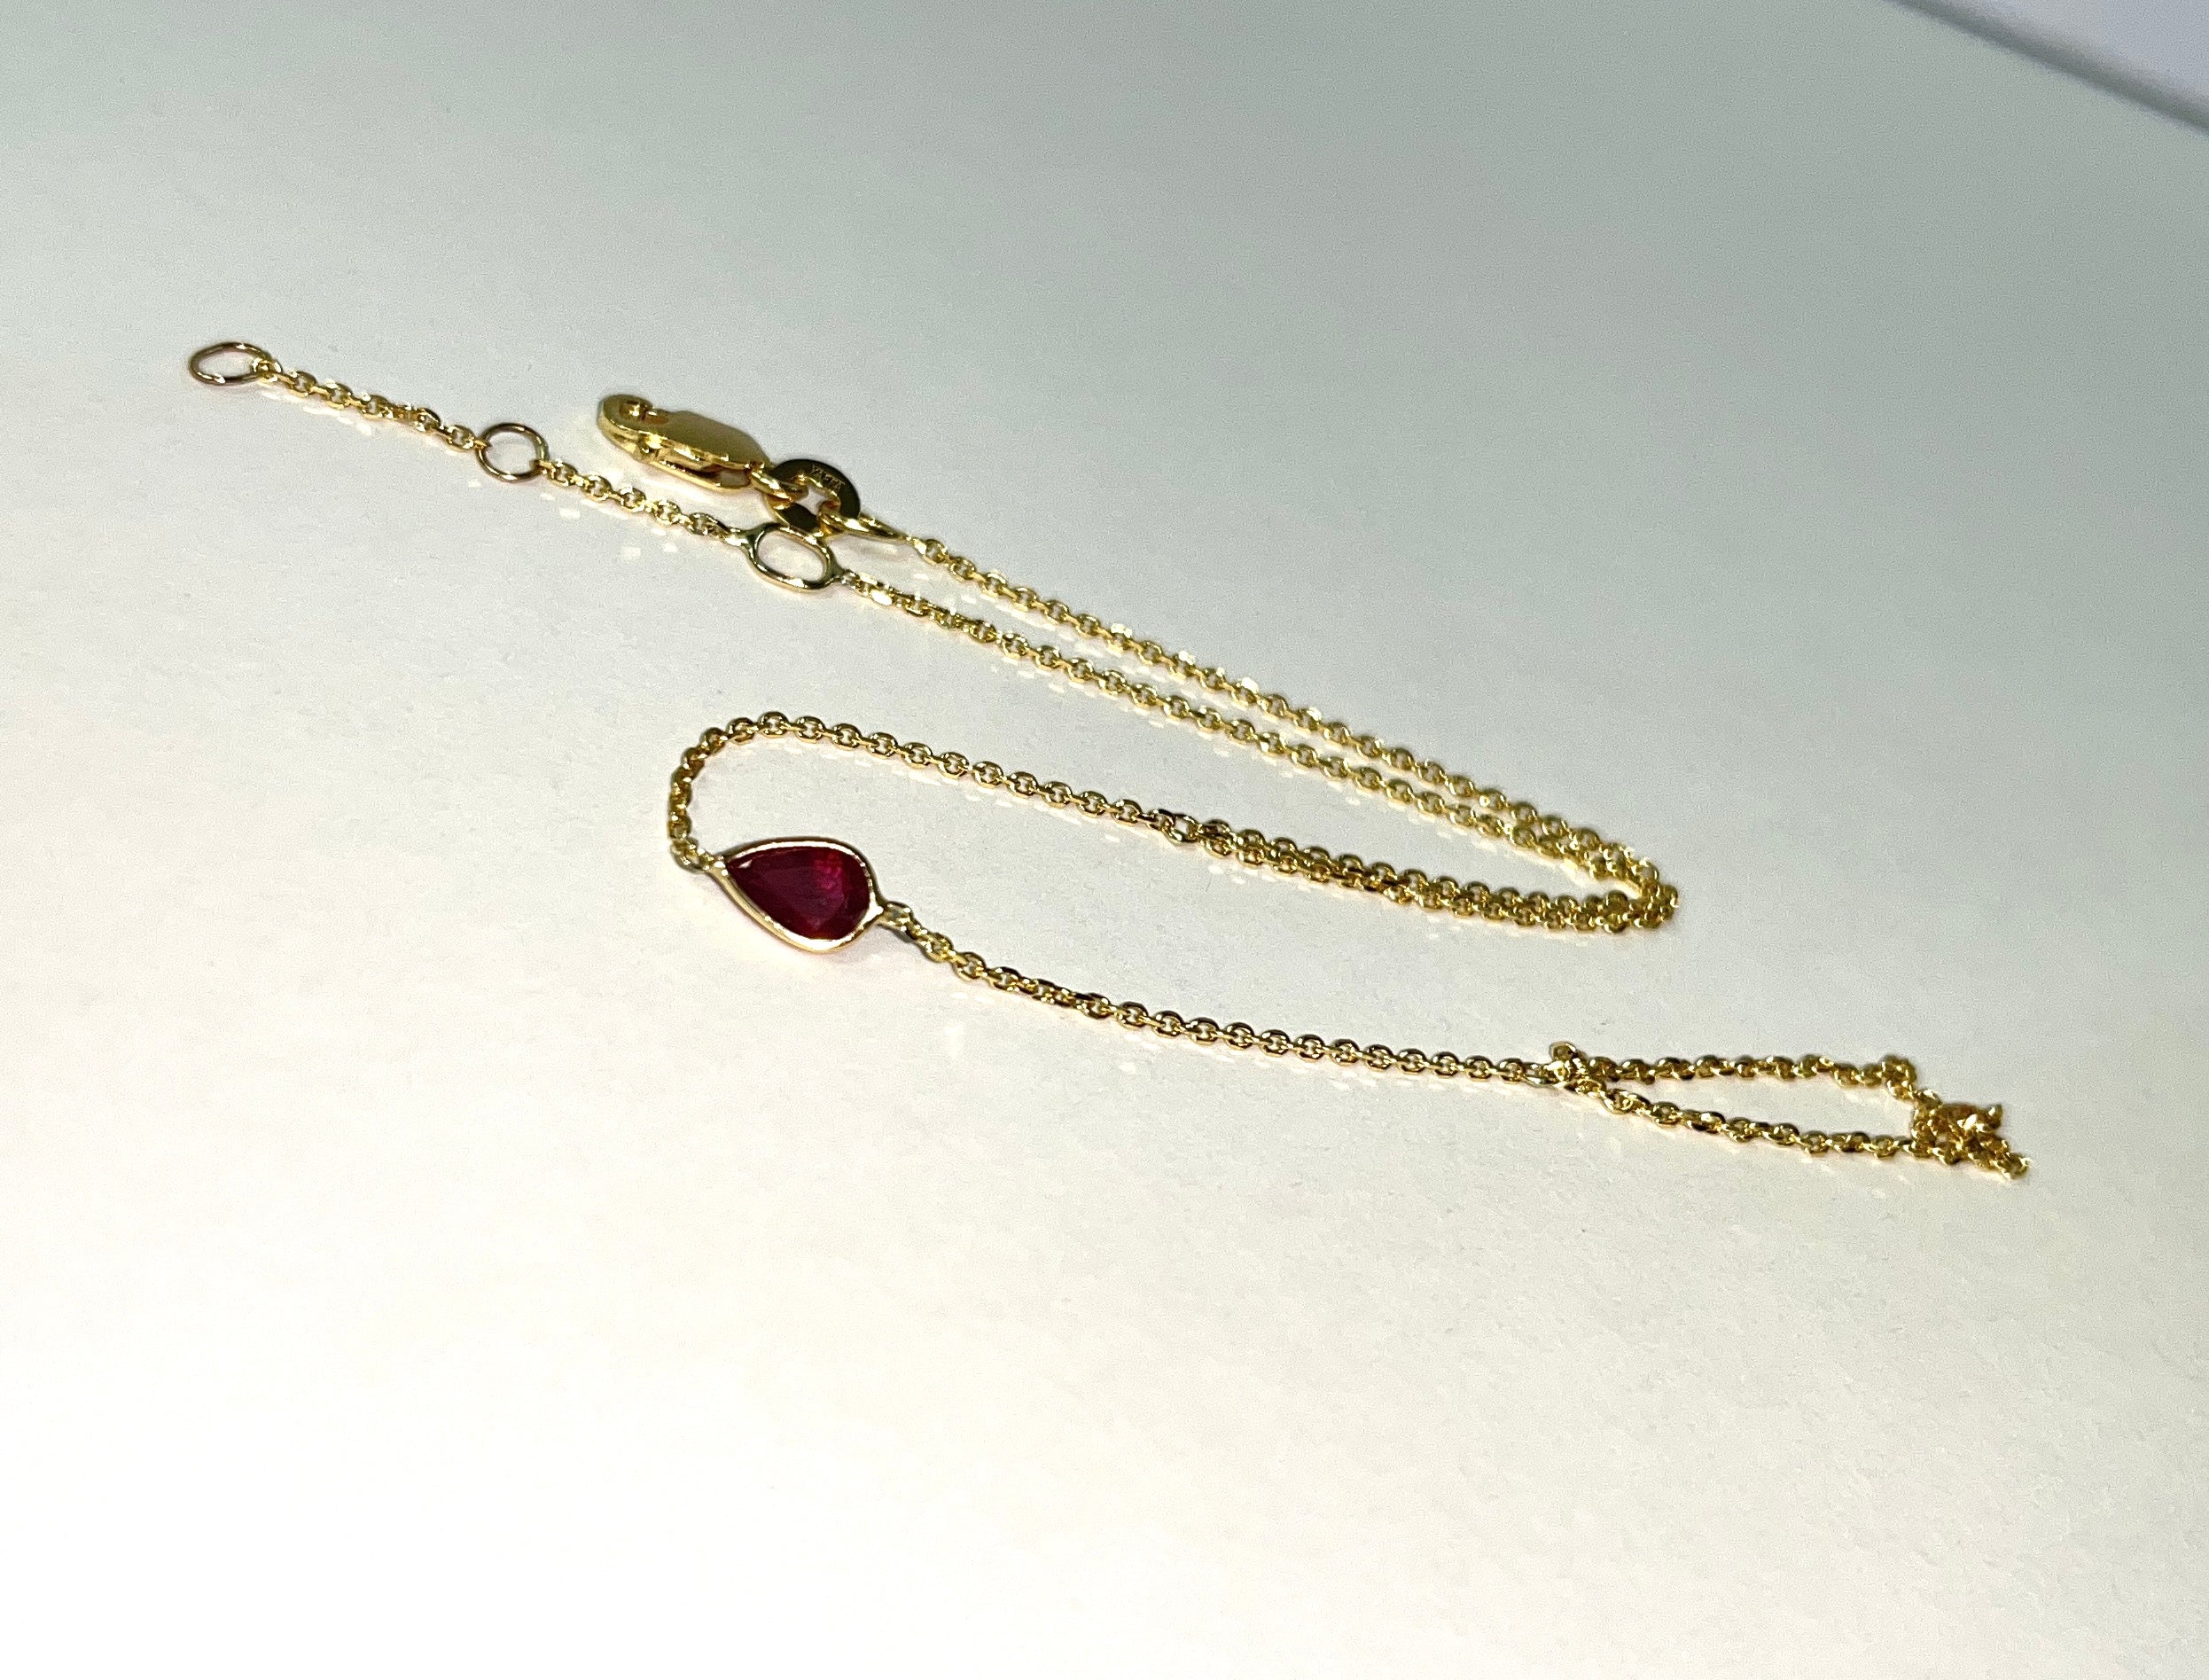 Pear Cut Ruby Hand Chain Bracelet in solid 14K Yellow Gold